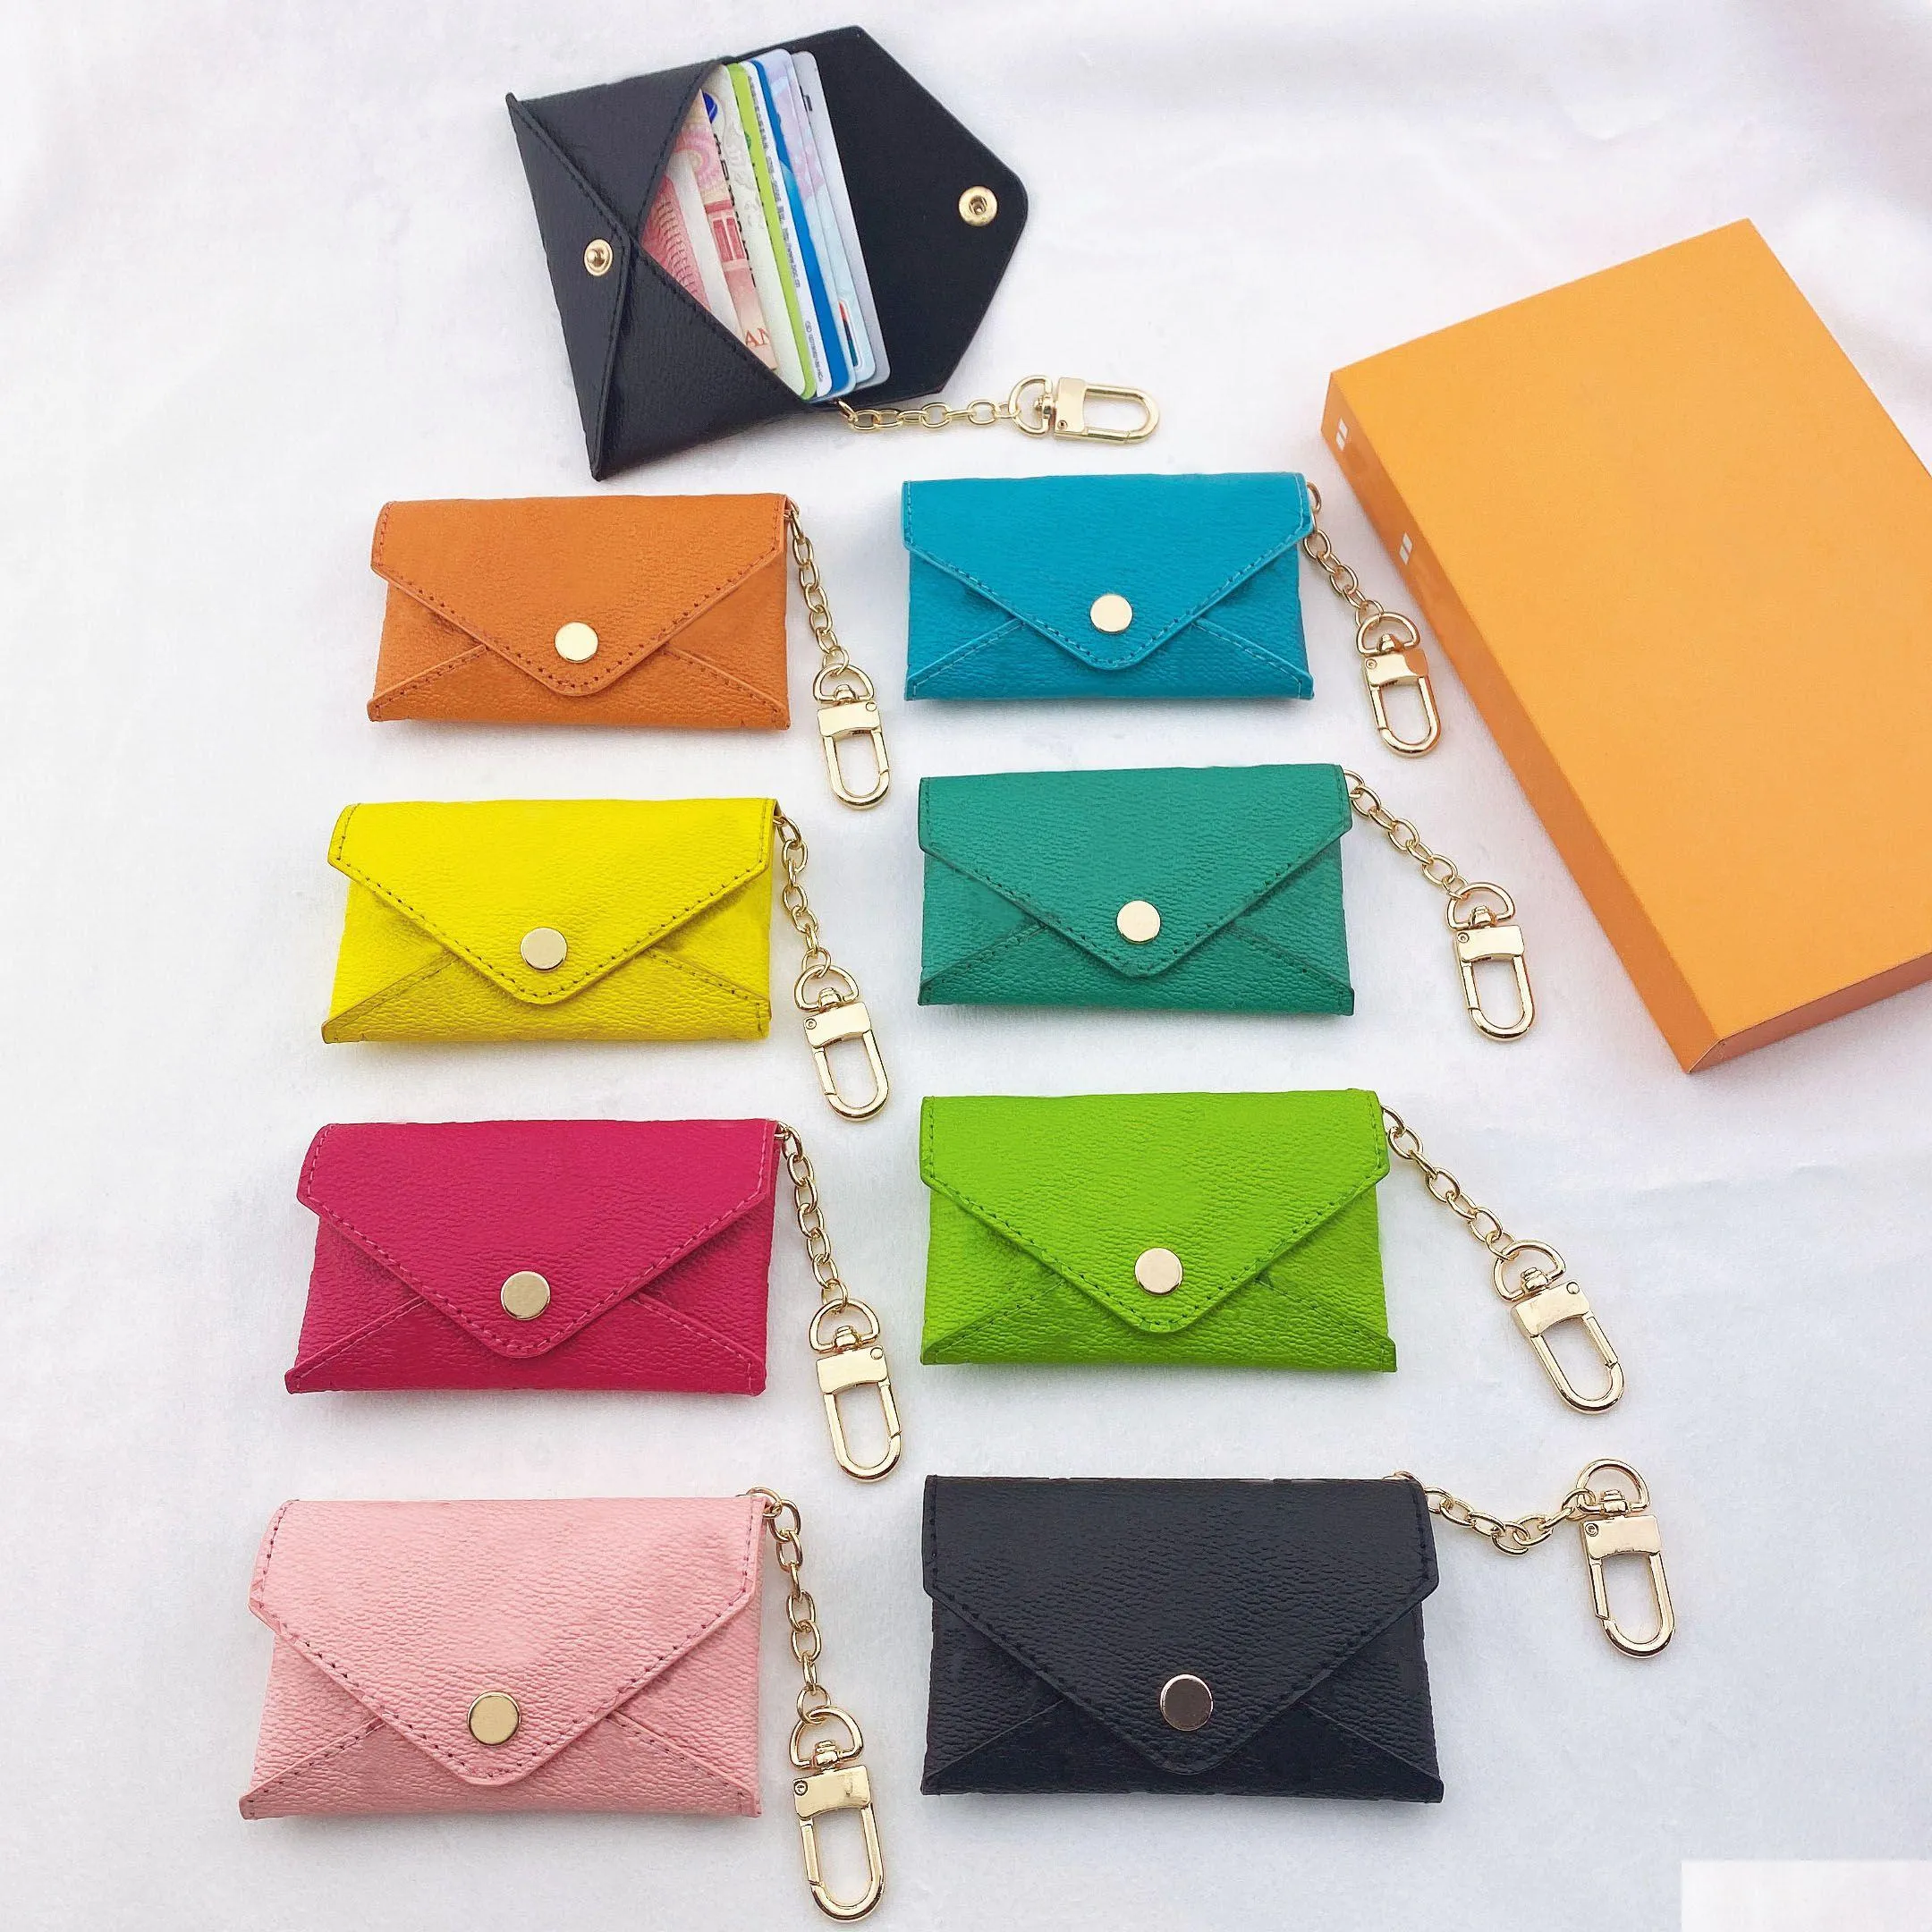 Keychains Lanyards Uni Designer Key Pouch Fashion Leather Purse Keyrings Mini Wallets Coin Credit Card Holder 19 Colors Epacket Drop D Dhd1C